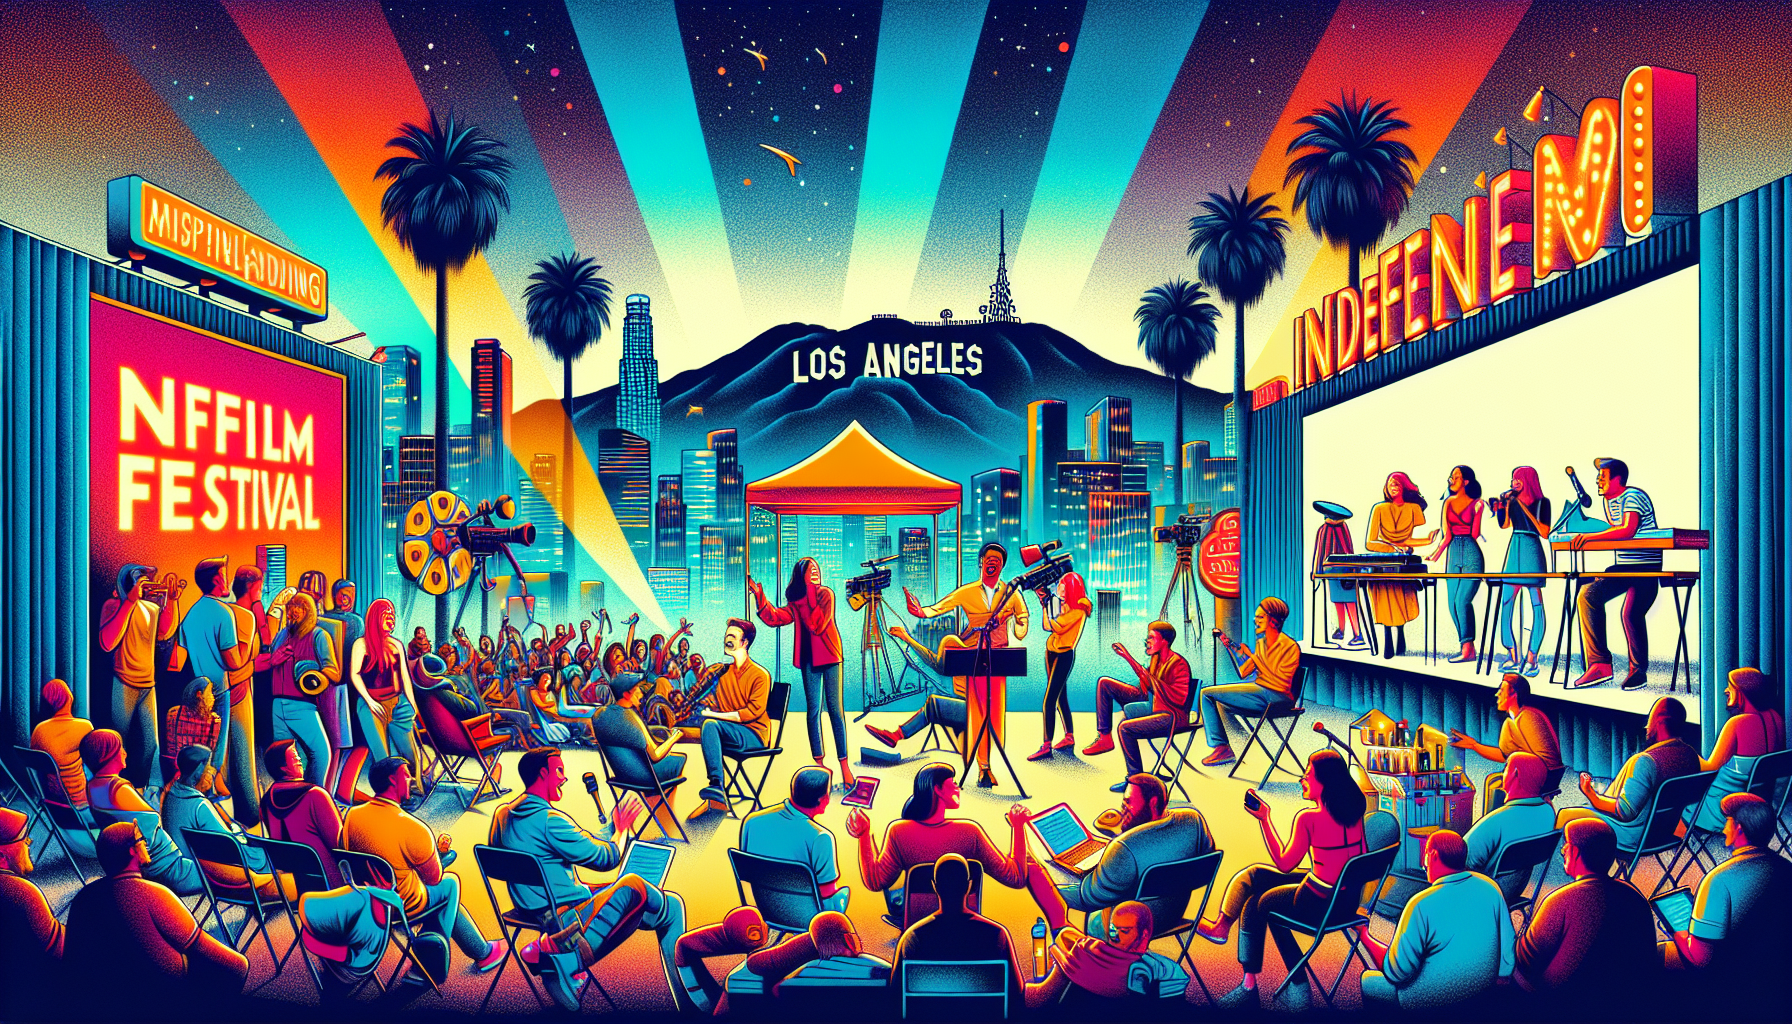 Vibrant conceptual artwork of the Slamdance Film Festival set against the iconic Los Angeles skyline, featuring filmmakers and indie artists showcasing their work under neon lights, with palm trees an